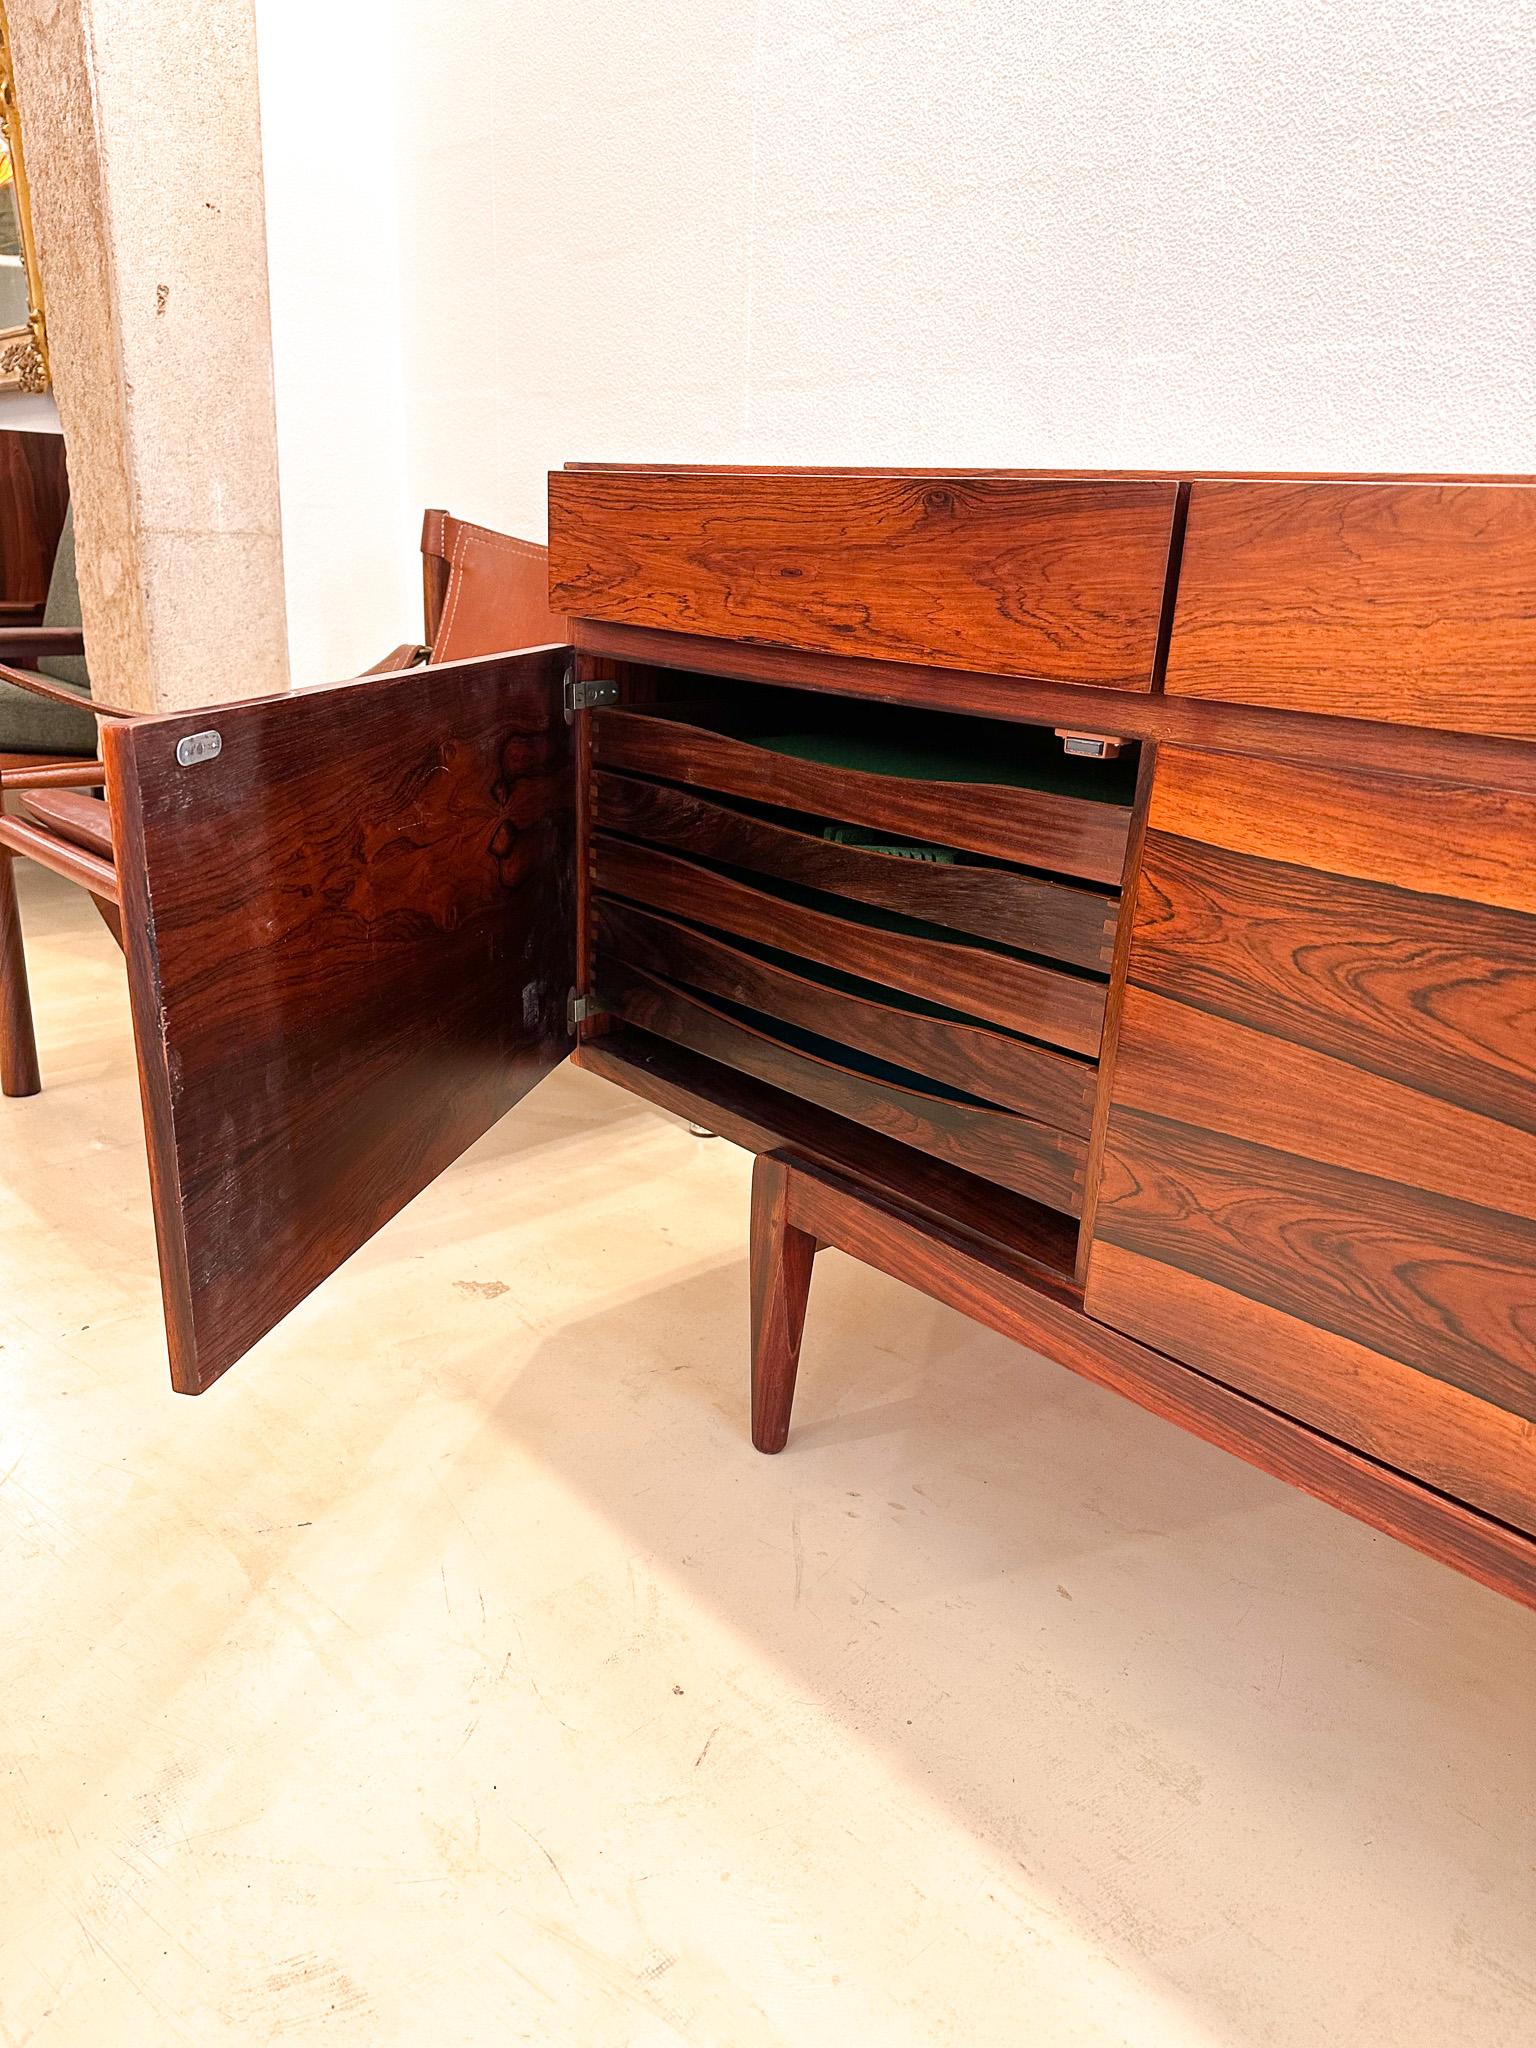 Designed by Ib Kofod-Larsen and manufactured in Denmark in the 1960s, this clean-lined sideboard features beautifully rosewood. The case sits on a raised base and offers four drawers above a four-door cabinet.
One of the most iconic and desired